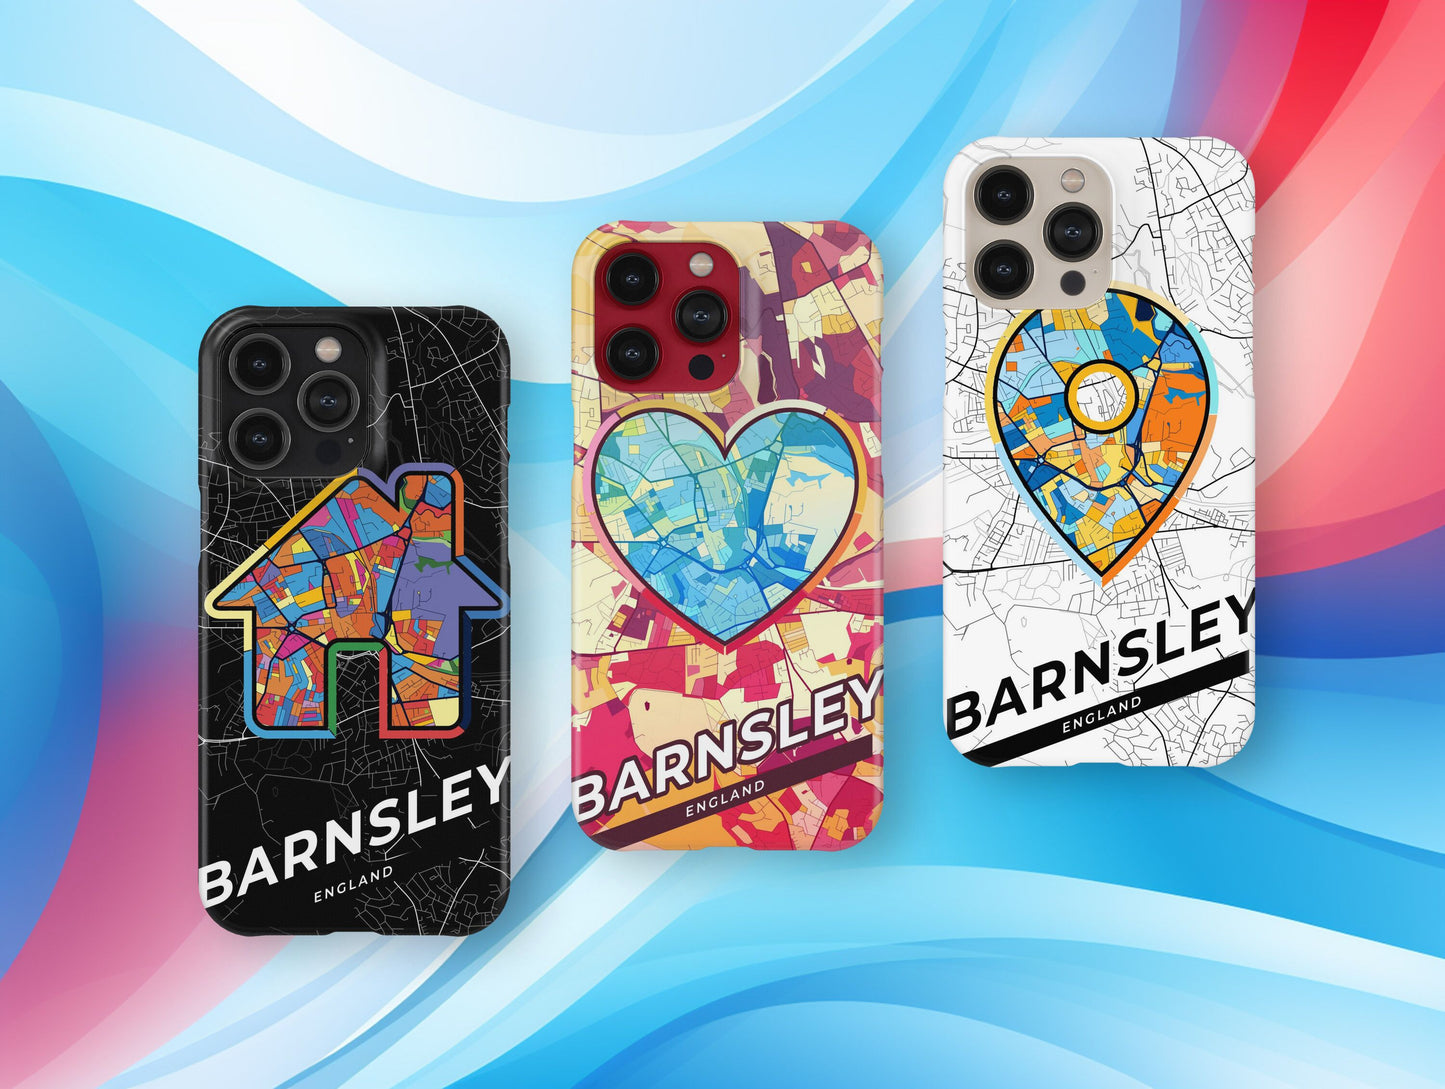 Barnsley England slim phone case with colorful icon. Birthday, wedding or housewarming gift. Couple match cases.